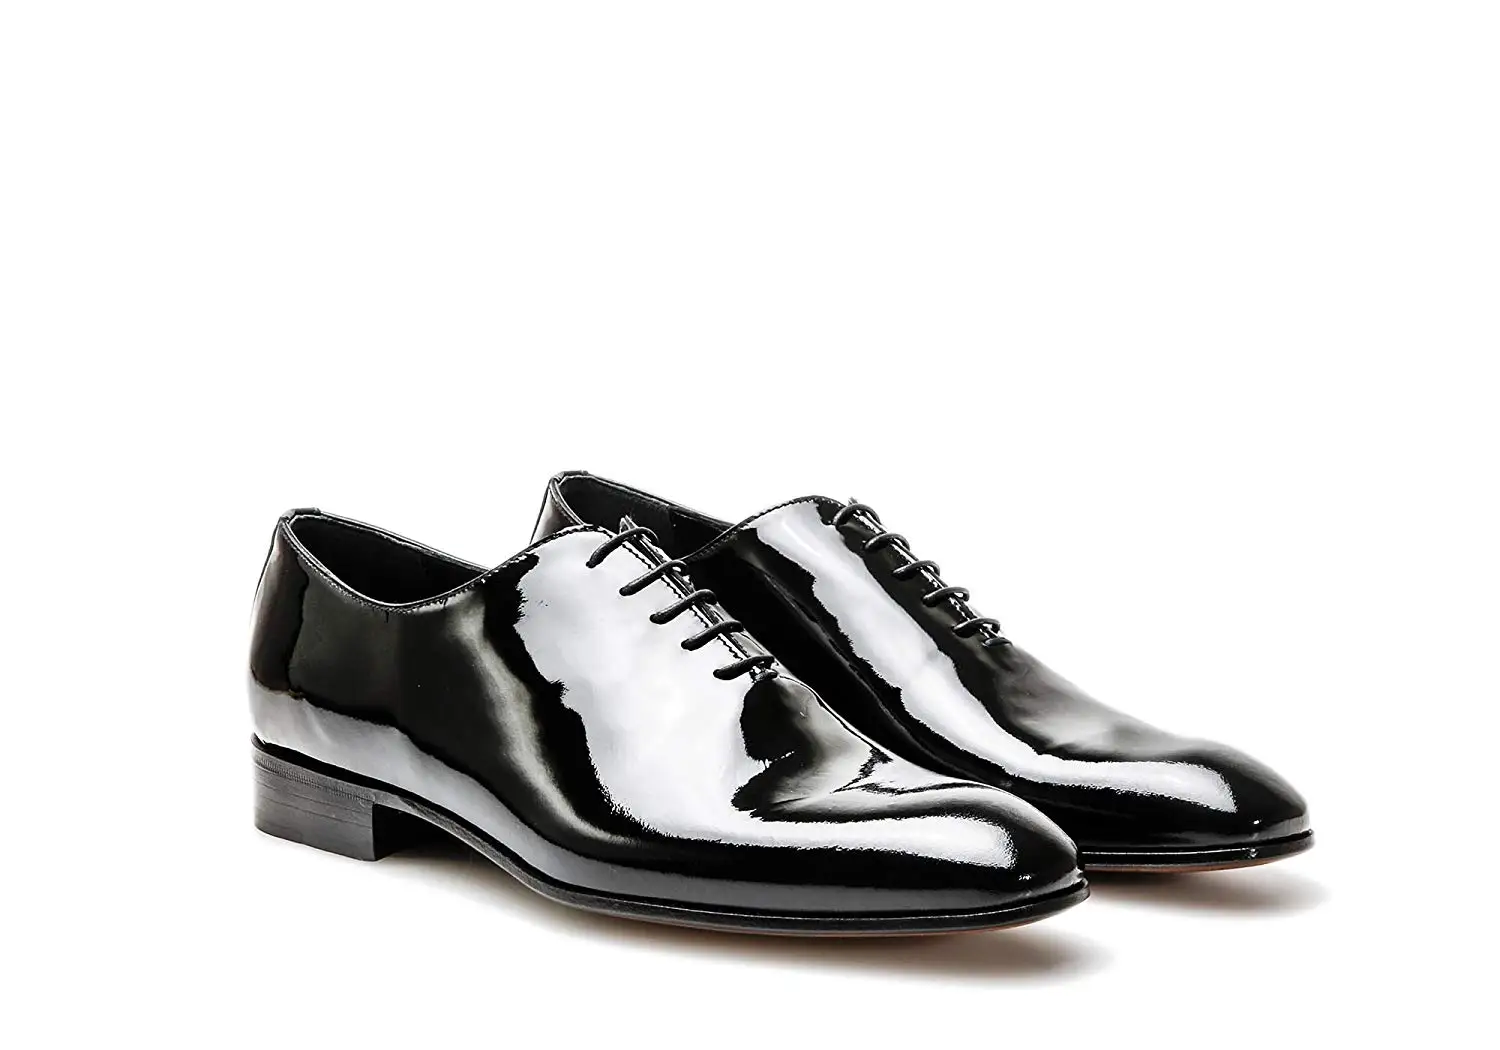 Cheap Black Patent Leather Tennis Shoes, find Black Patent Leather ...